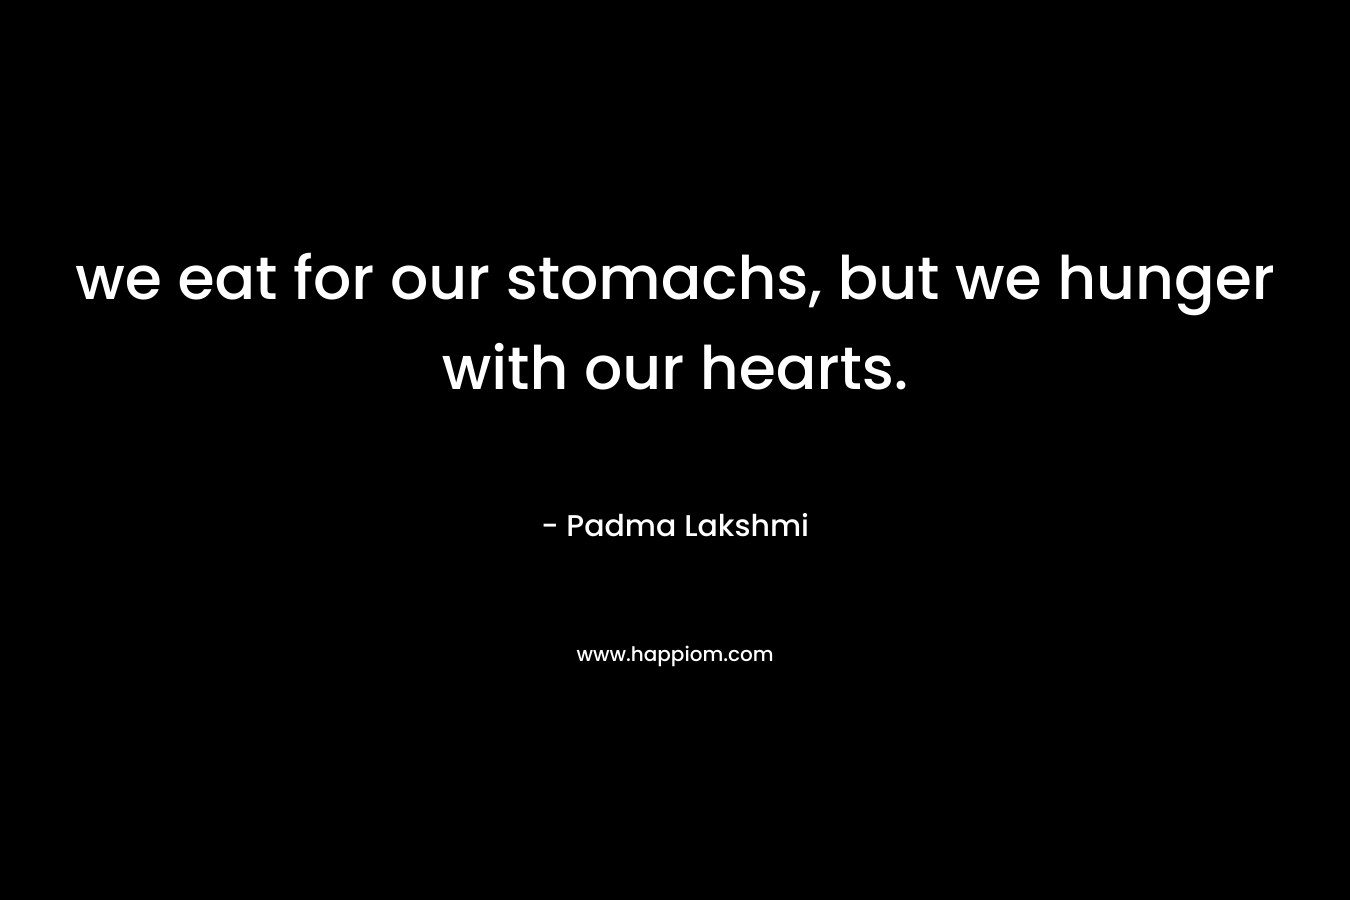 we eat for our stomachs, but we hunger with our hearts.